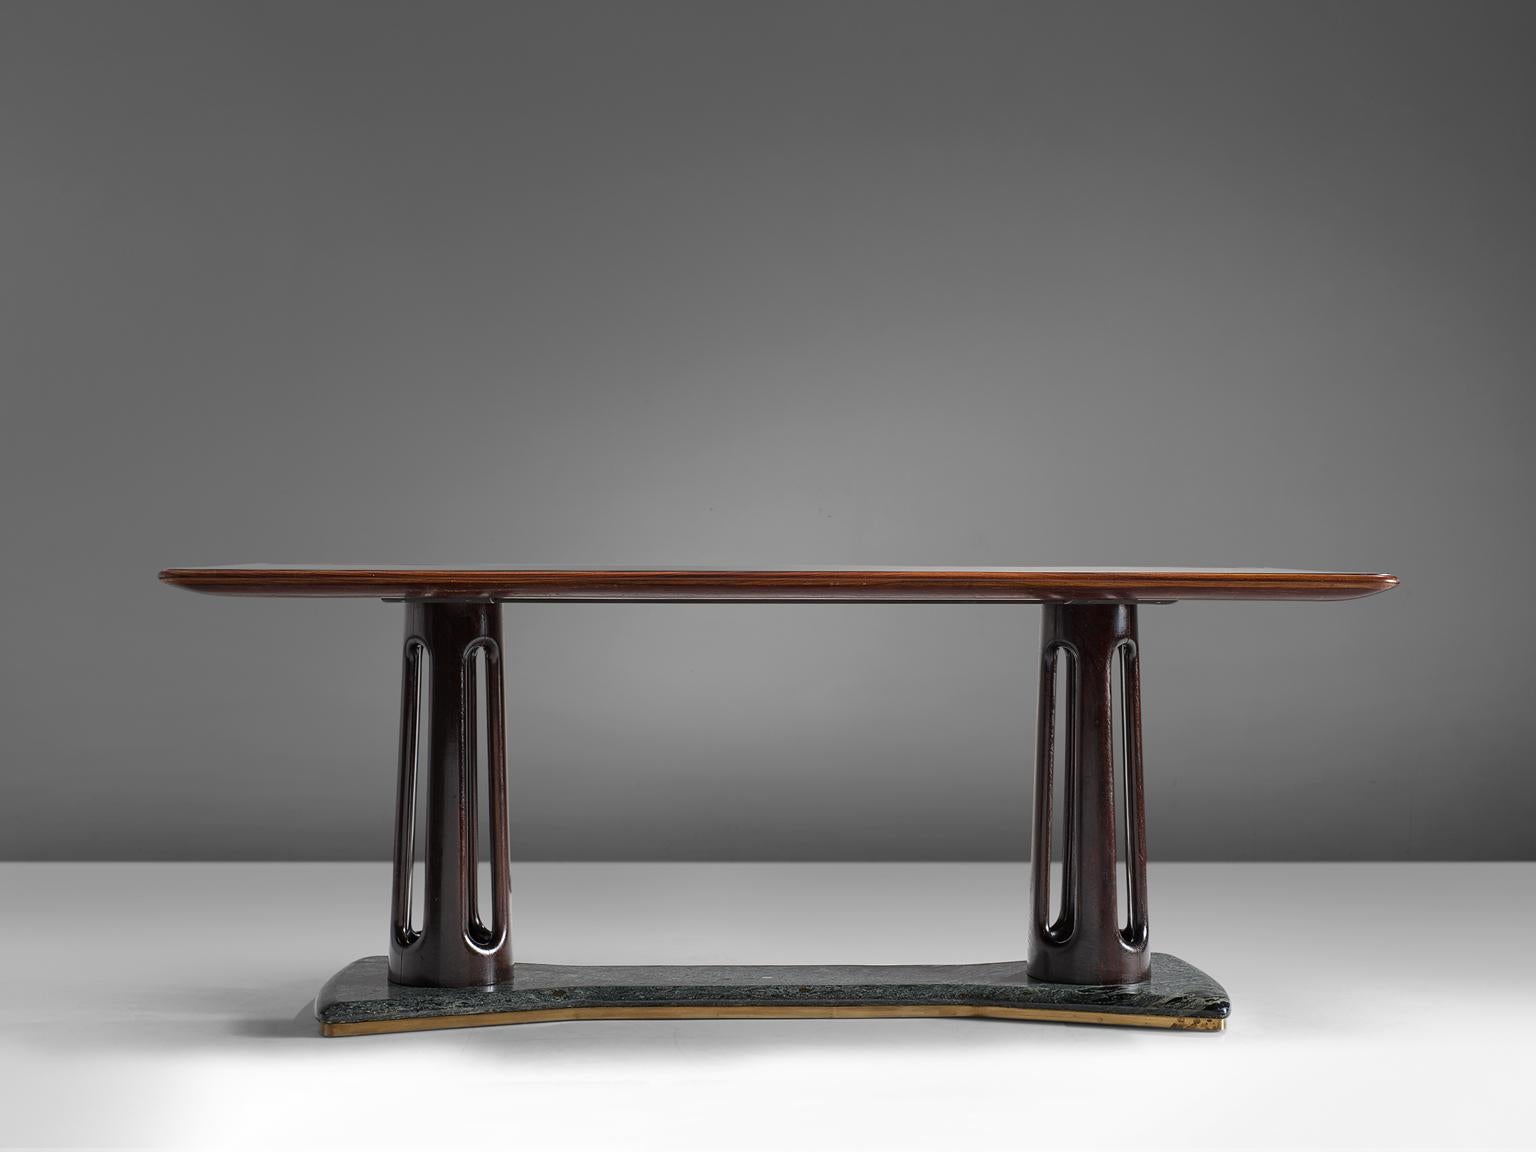 Attributed to Guglielmo Ulrich, dining table, wood, glass, brass and serpentine marble, , Italy, 1940s. 

Luxurious table with rectangular top. The top consist of glass with wooden trim. Two round columns with nice carved details. Serpentine